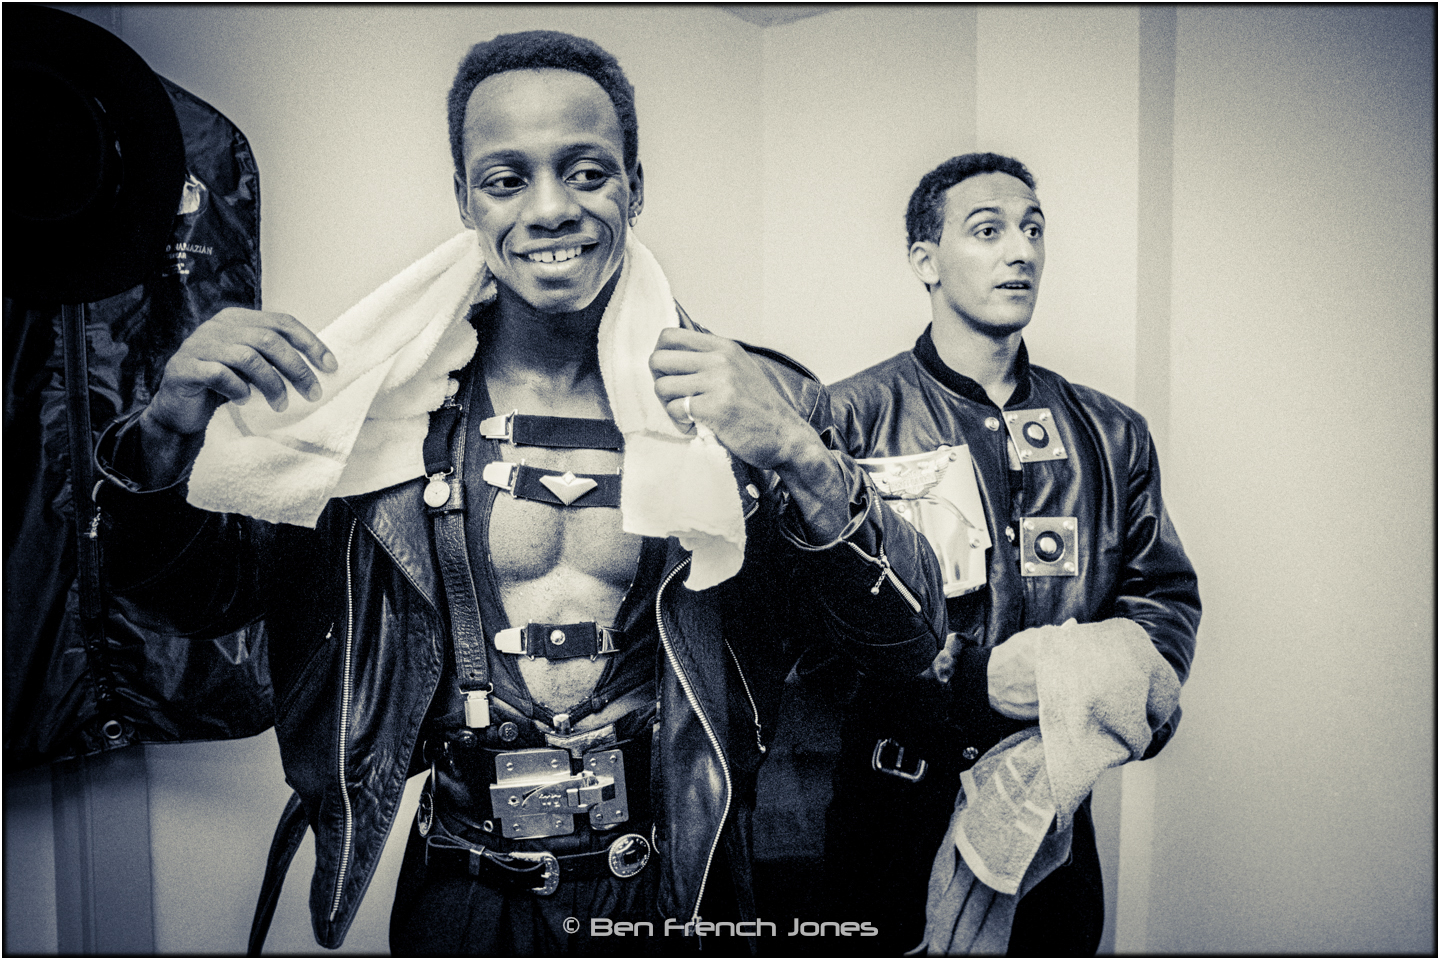 london boys dennis fuller and edem ephraim in black leather outfits cooling down in dressing room